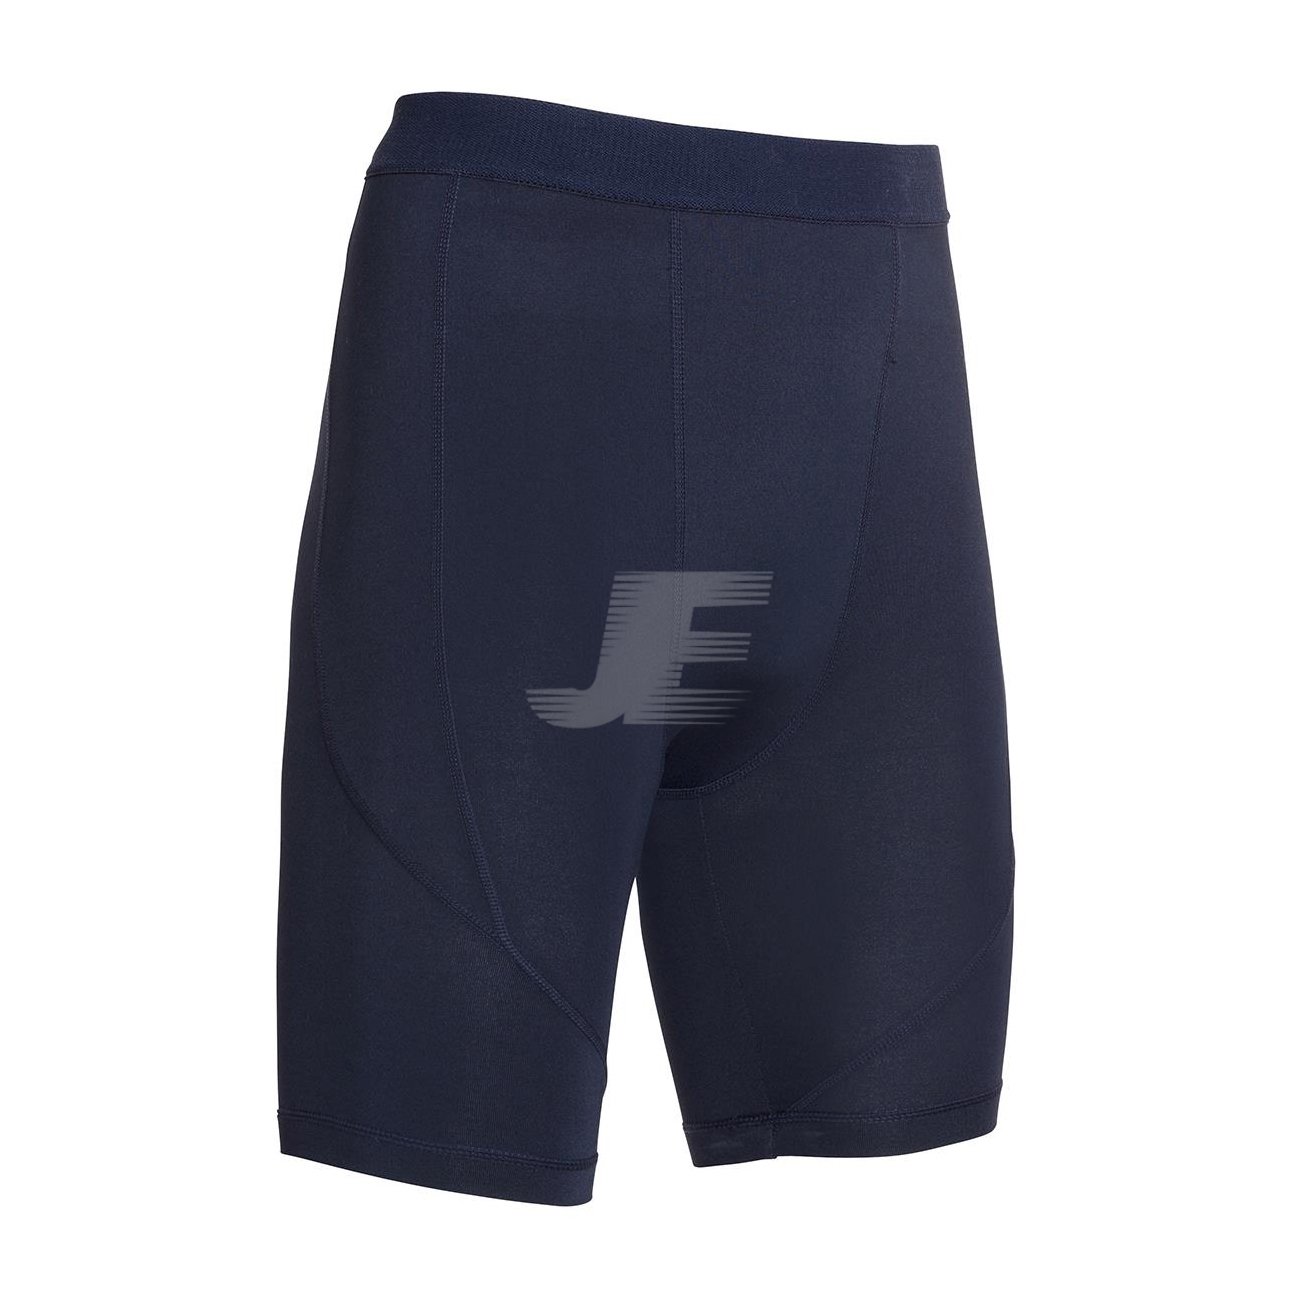 Mens Gym Workout Wear Navy Blue Long Compression Shorts